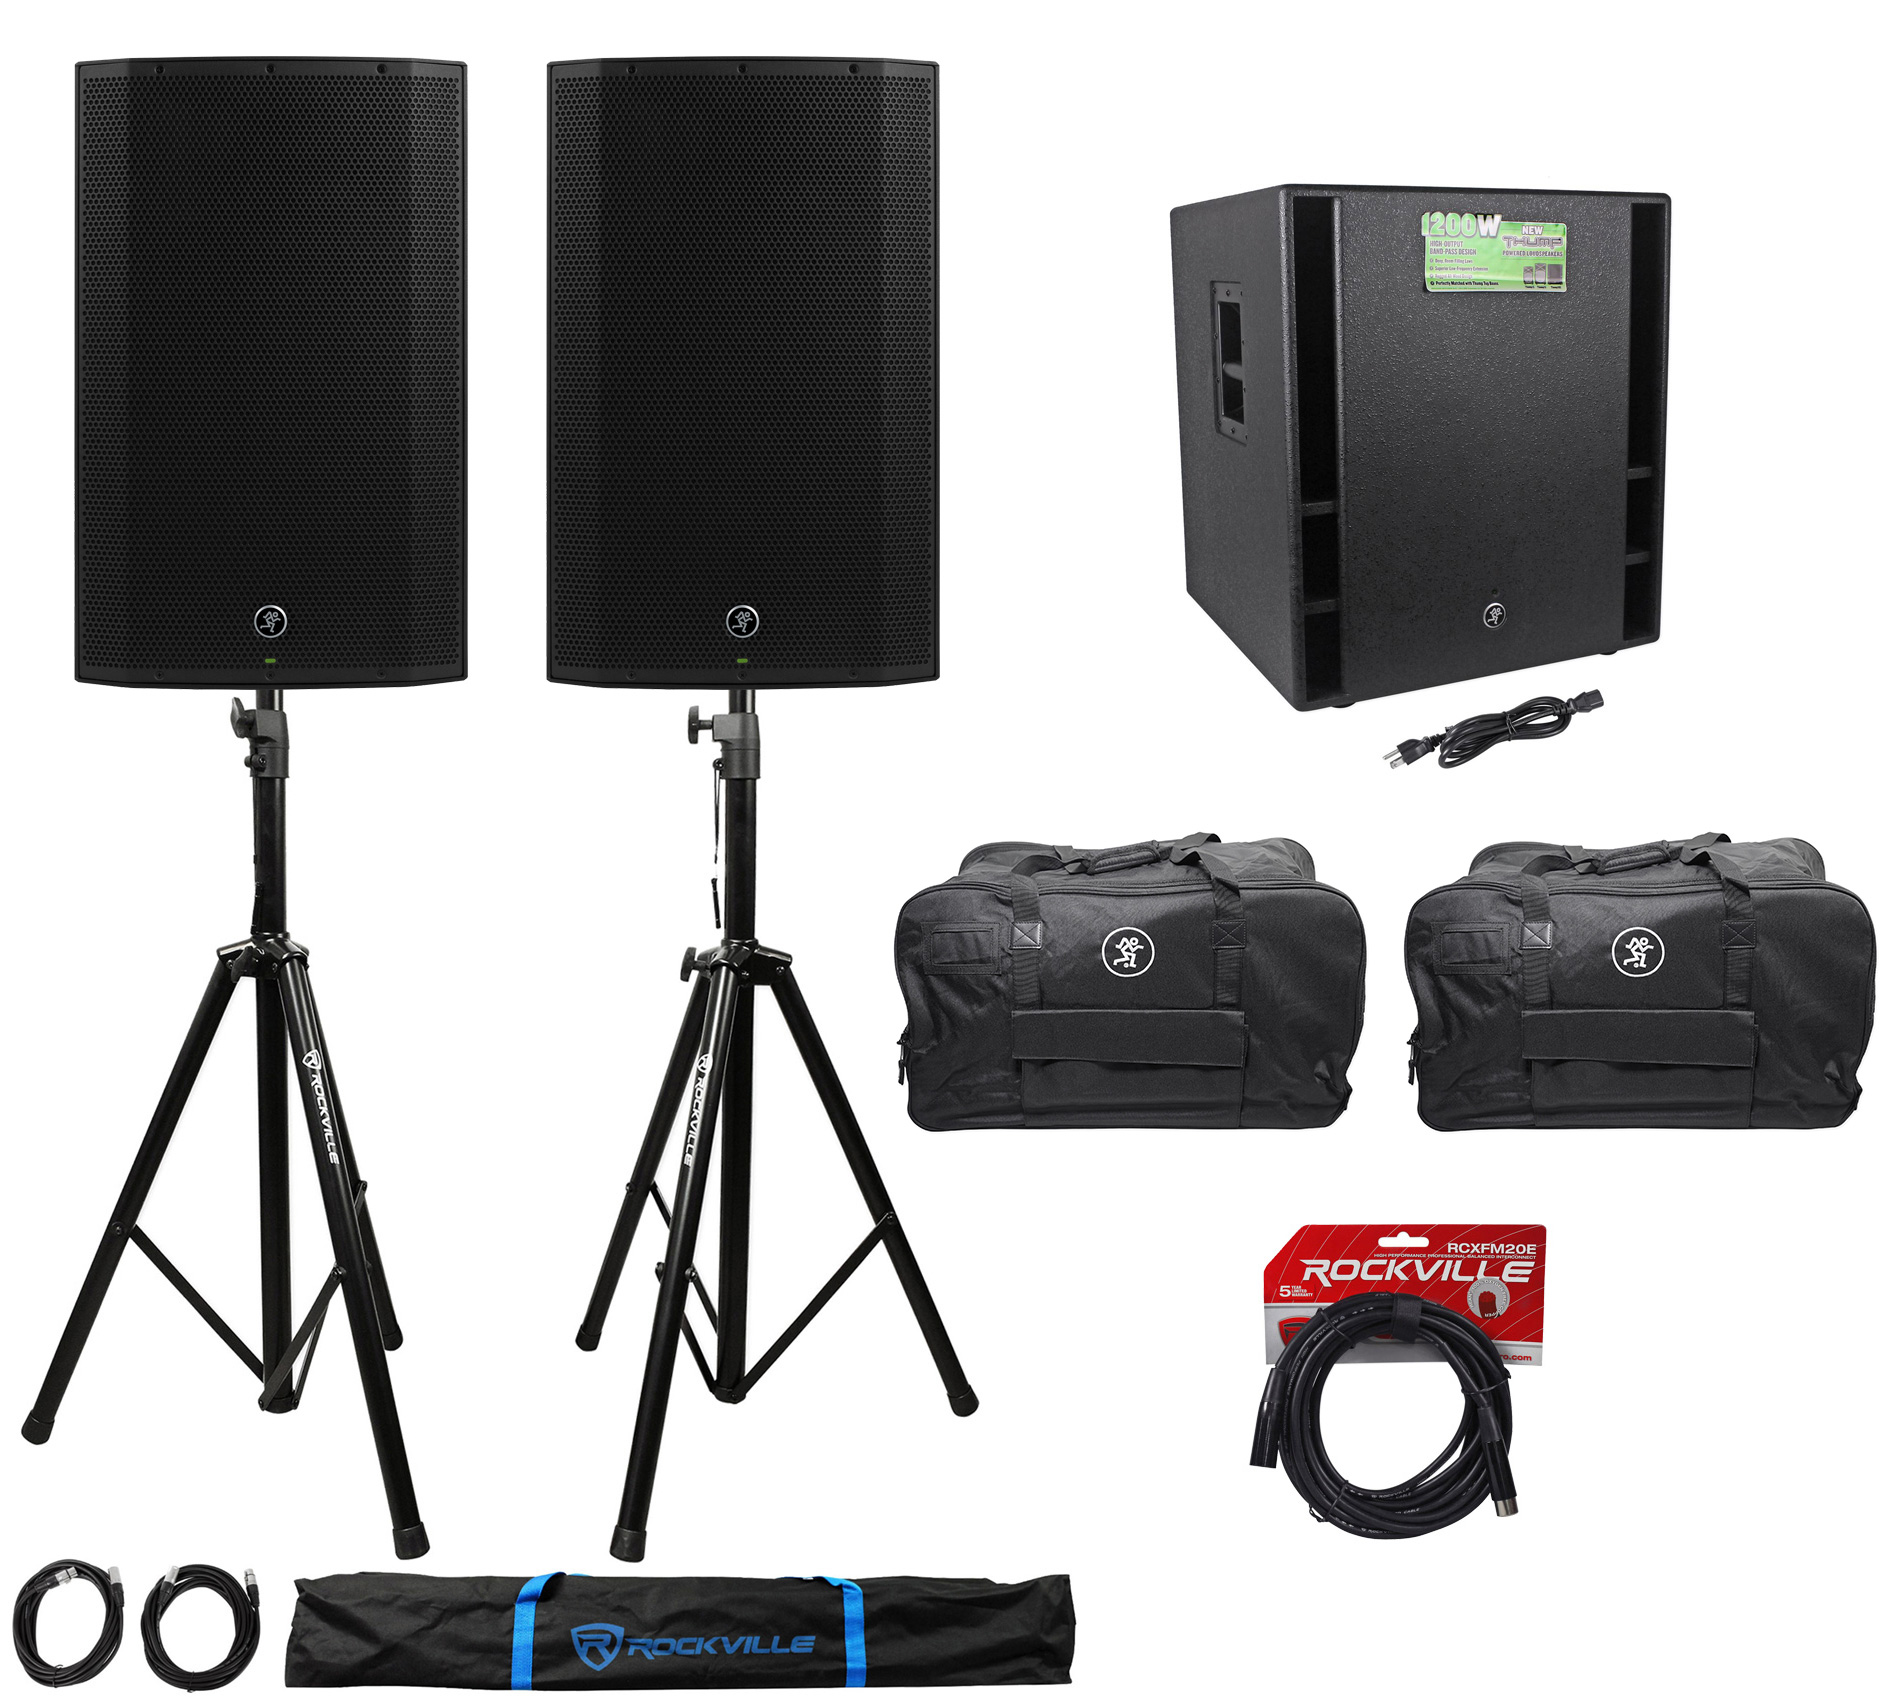 (2) Mackie Thump15A 15" Powered DJ PA Speakers+ Thump18s Subwoofer+Stands+Cables